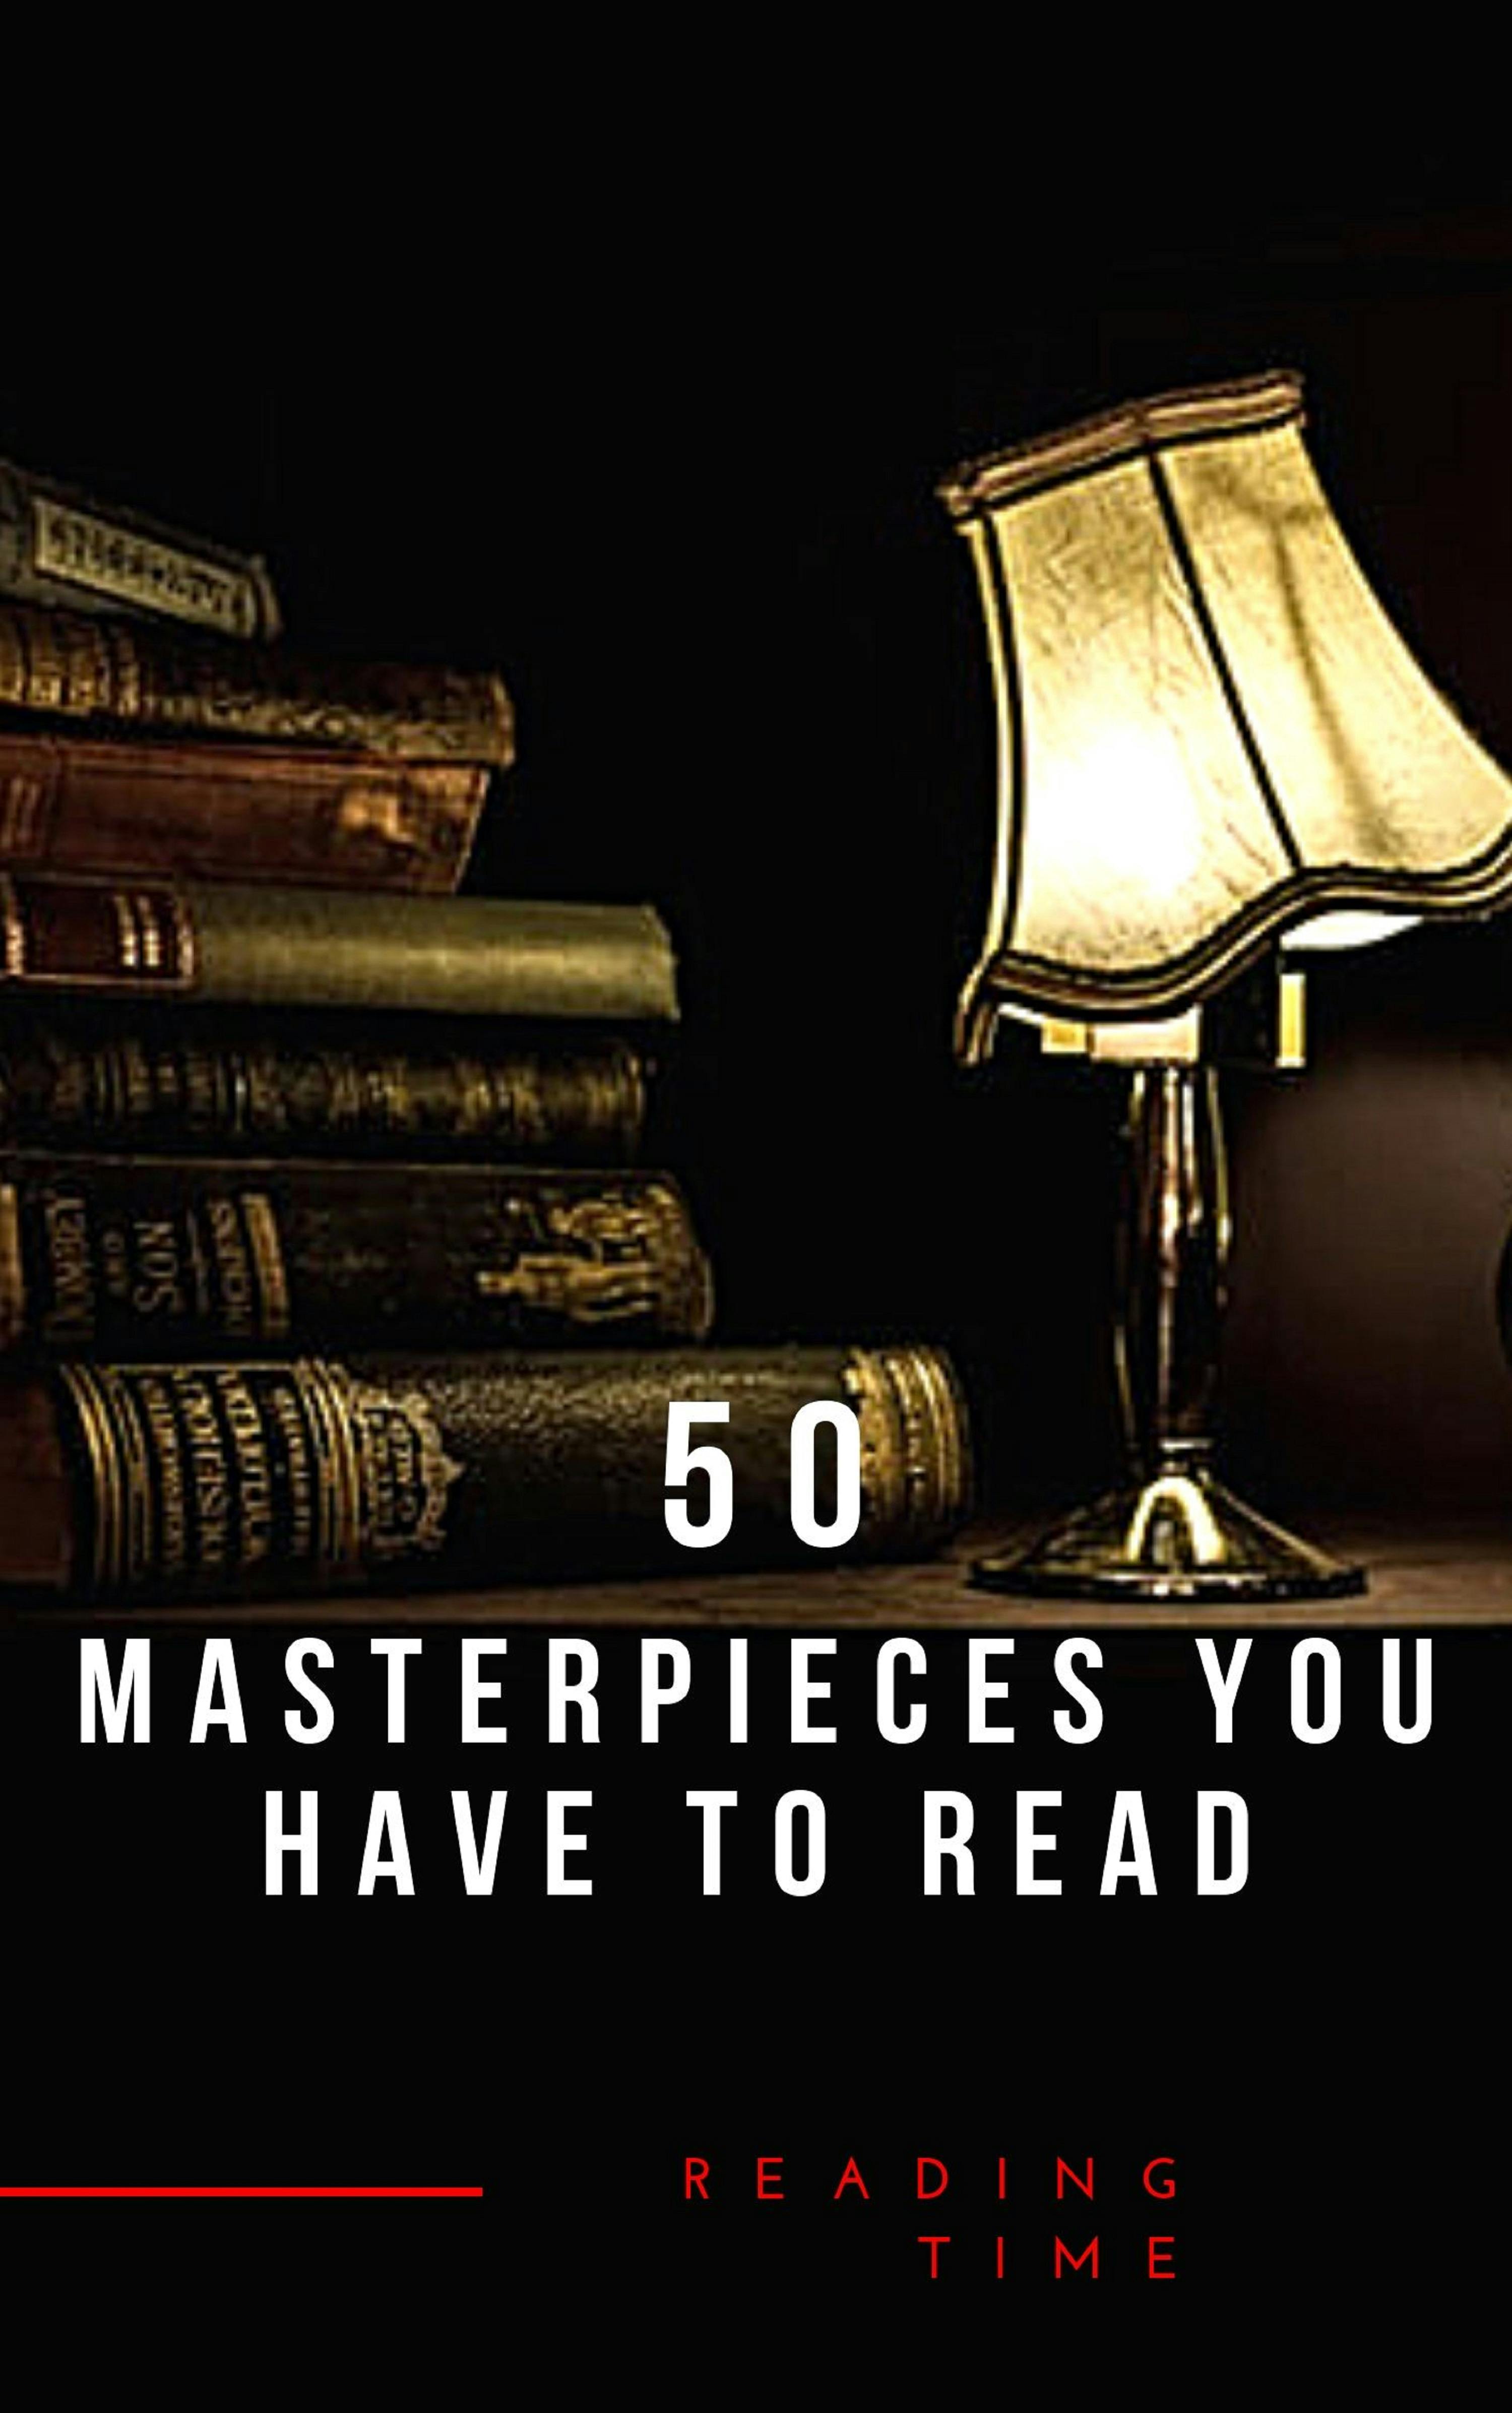 50 Masterpieces you have to read - undefined